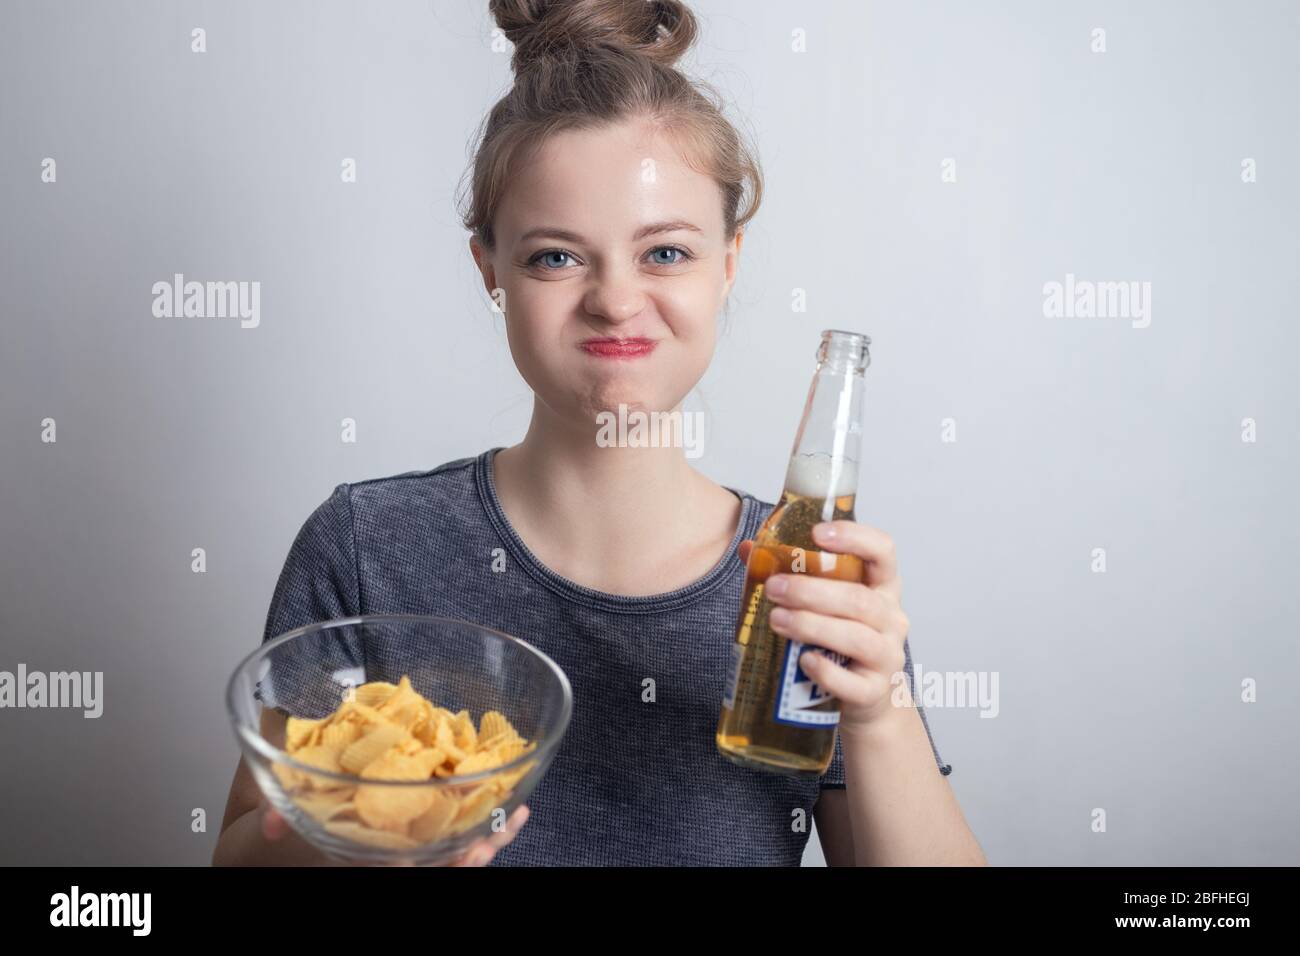 Smiling young caucasian woman girl drinking bottle of beer and holding potato chips crisps Stock Photo